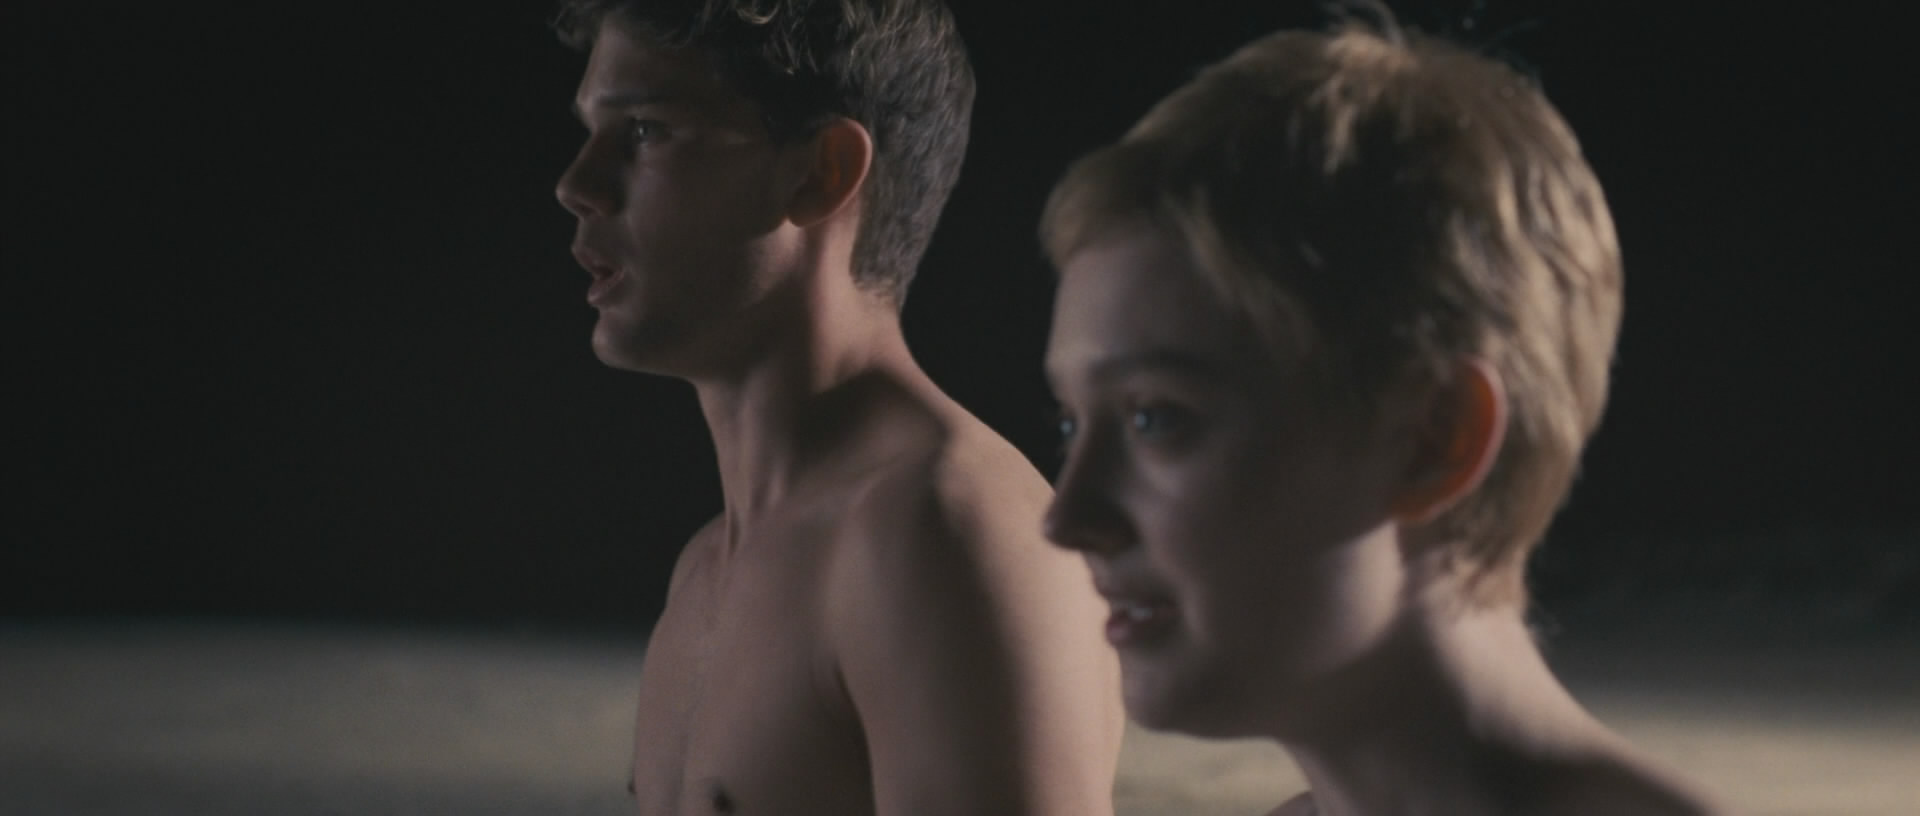 Jeremy Irvine in Now Is Good